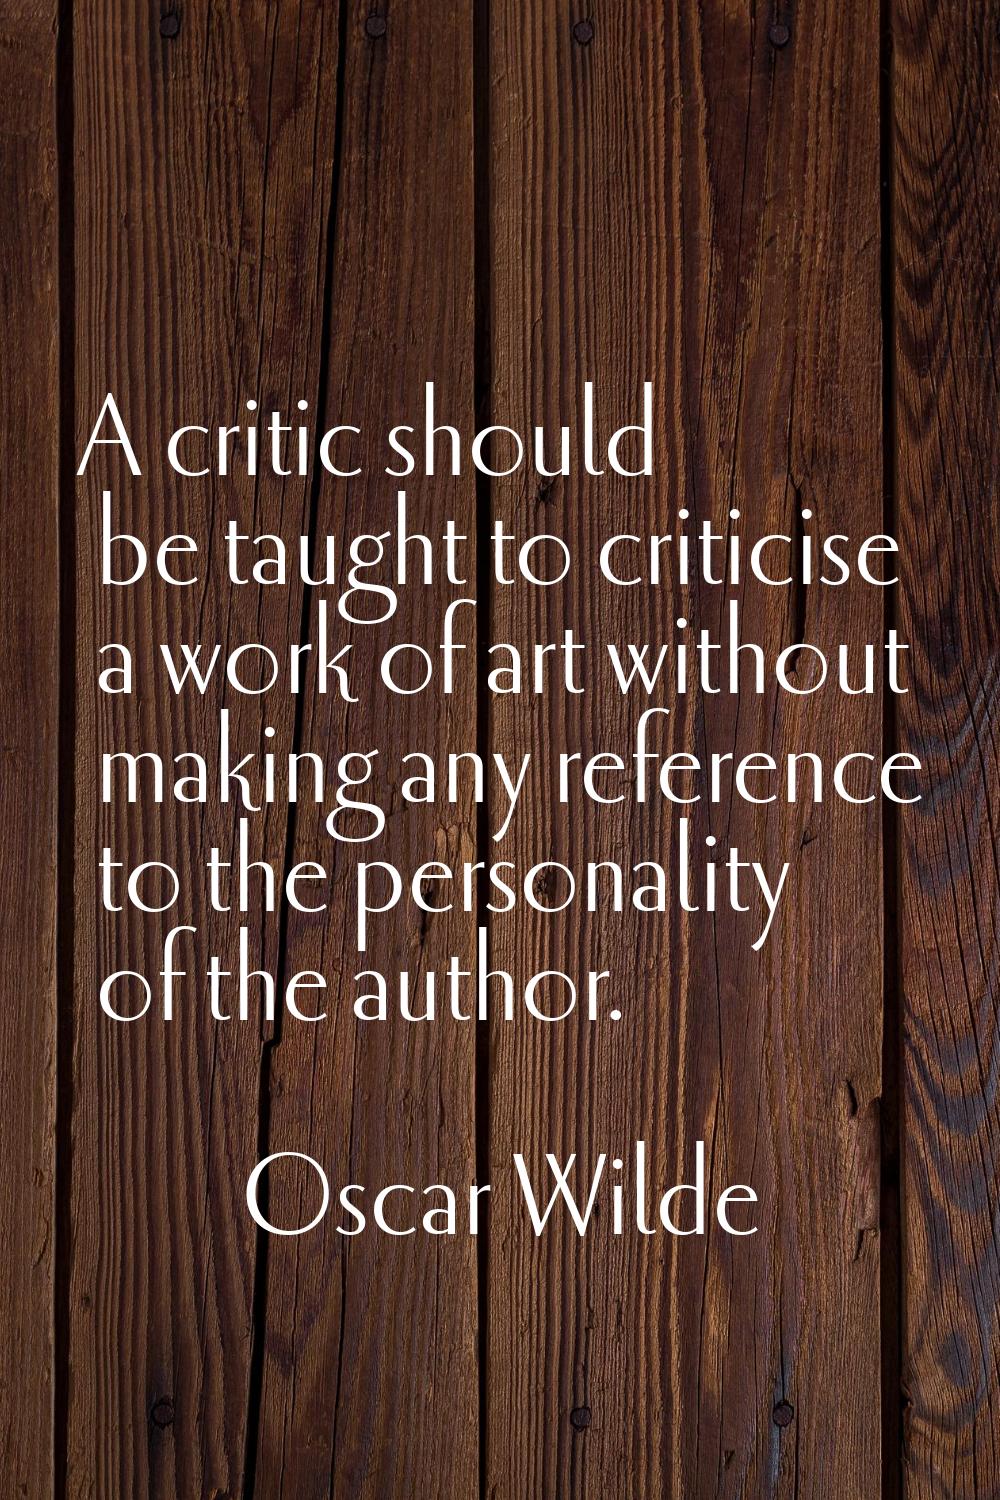 A critic should be taught to criticise a work of art without making any reference to the personalit